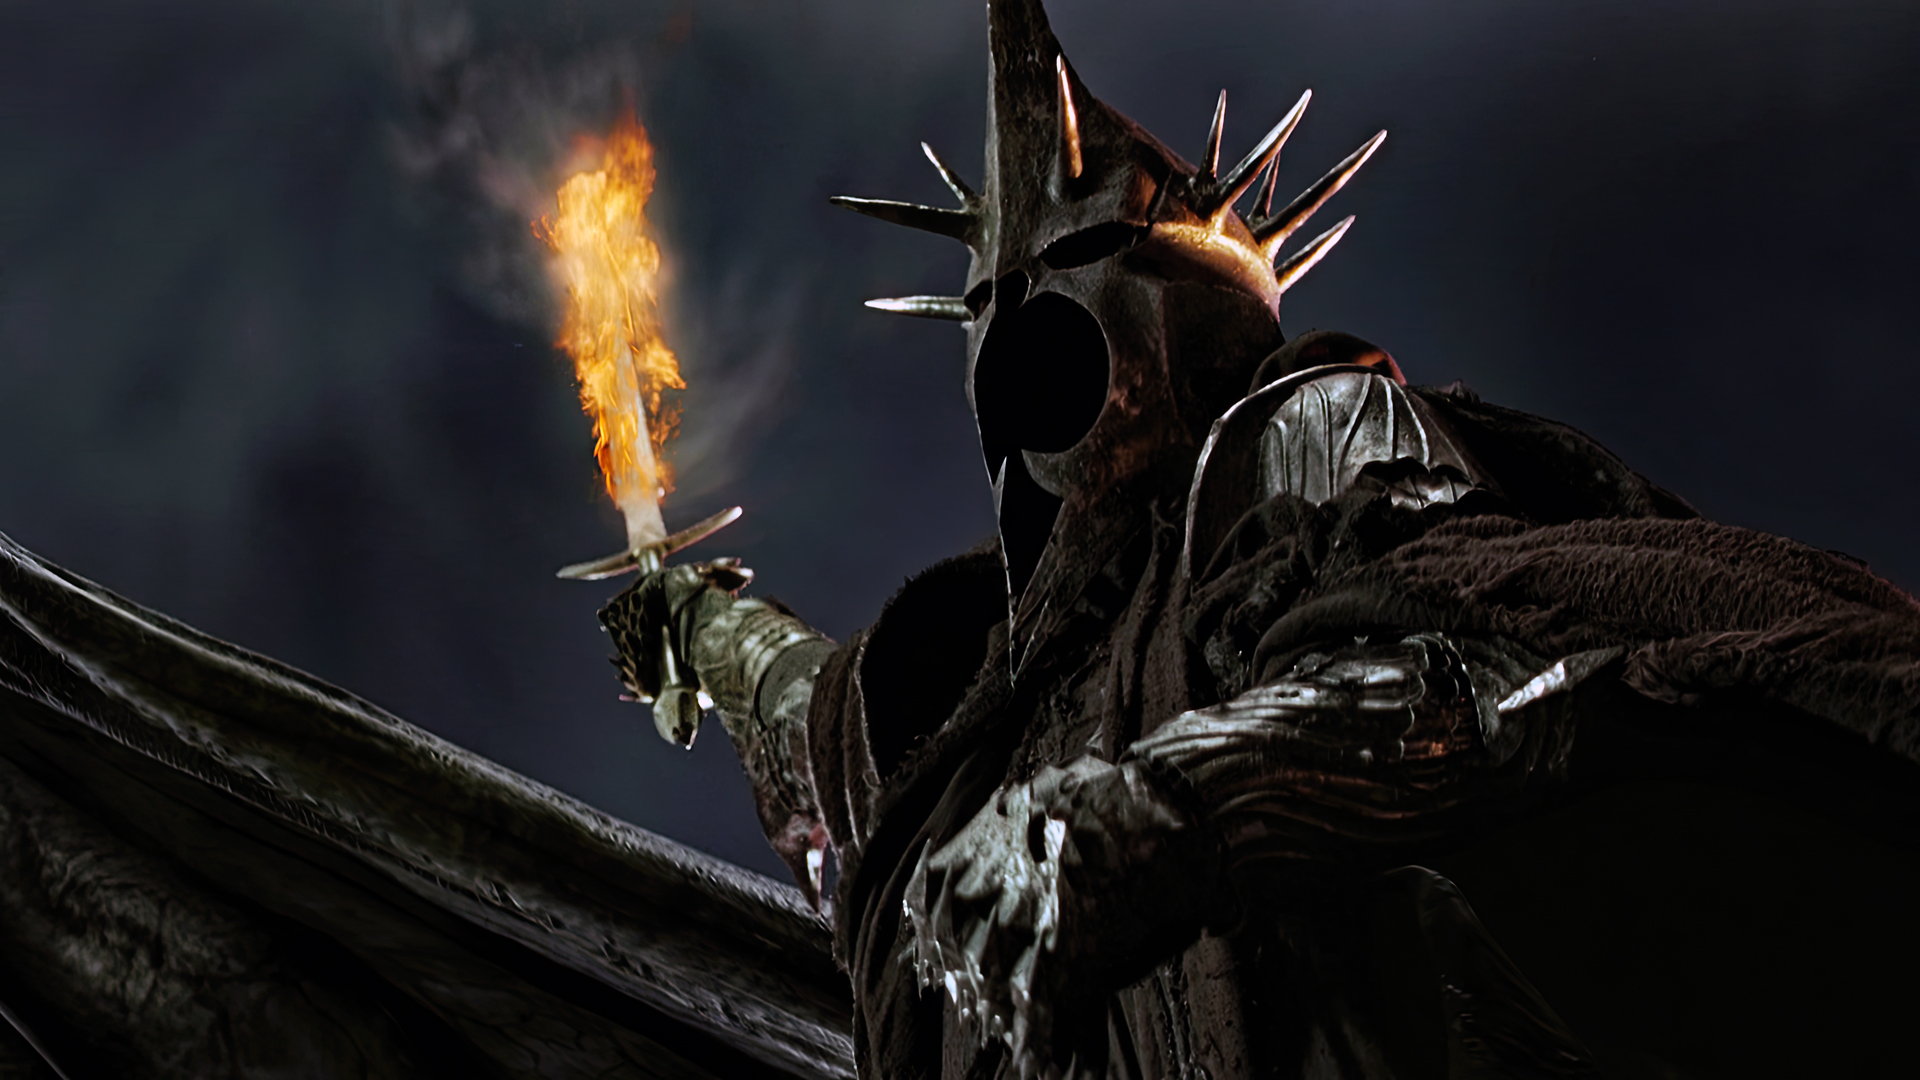 The Lord Of The Rings The Return Of The King Witch King Of Angmar Movies Film Stills Helmet Flaming  1920x1080